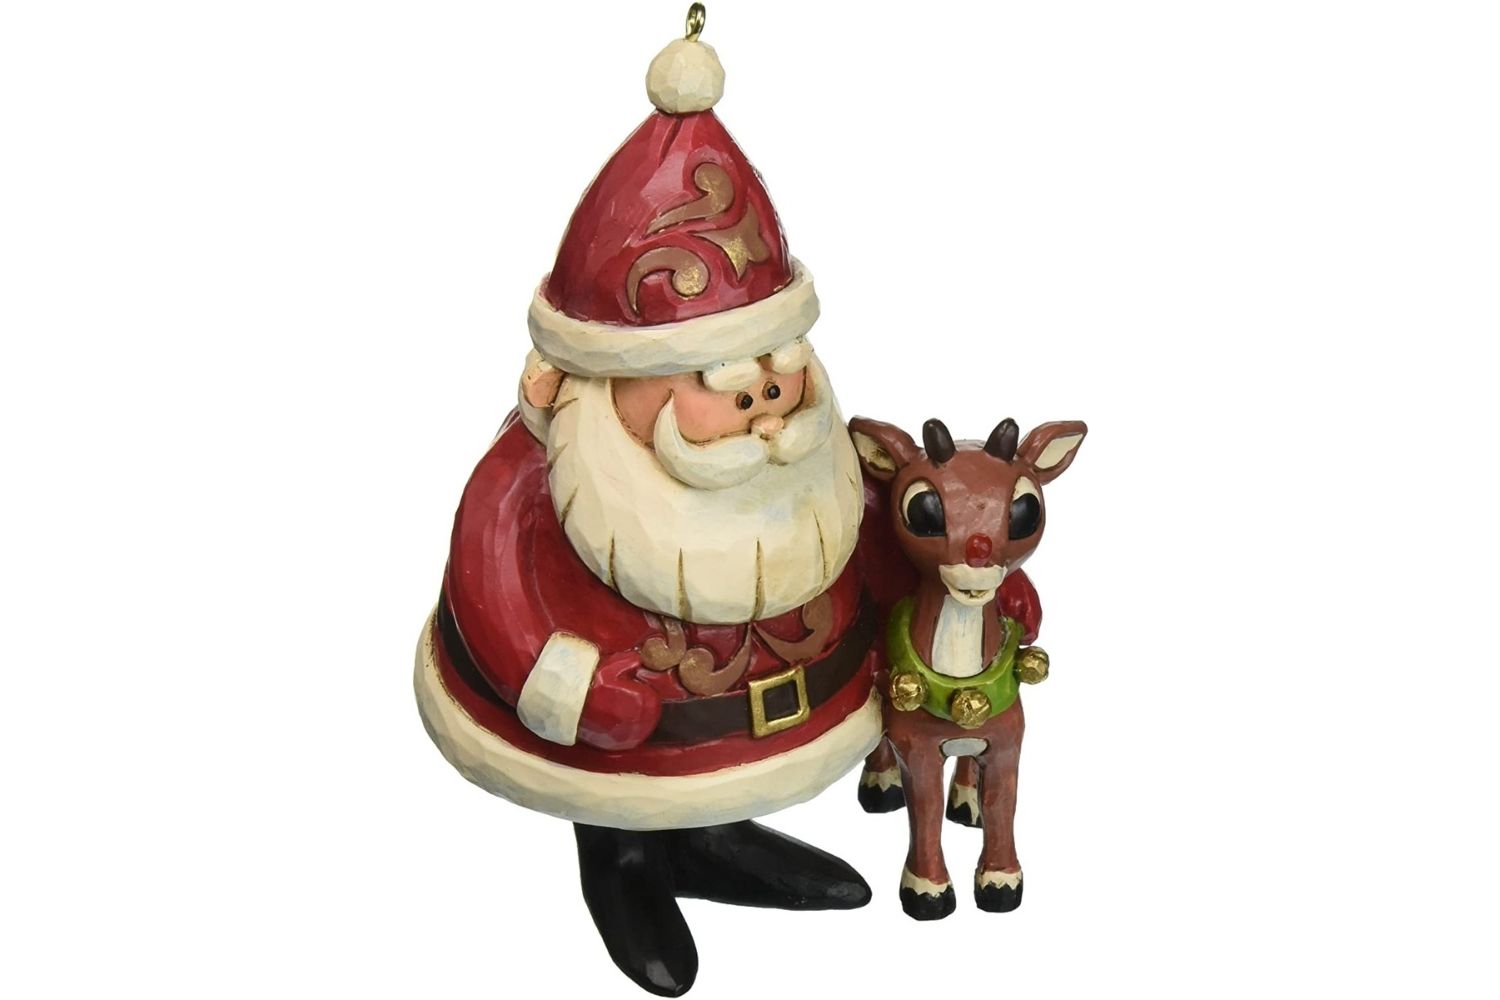 The Best Christmas Ornaments Option: Jim Shore “Rudolph the Red-Nosed Reindeer”